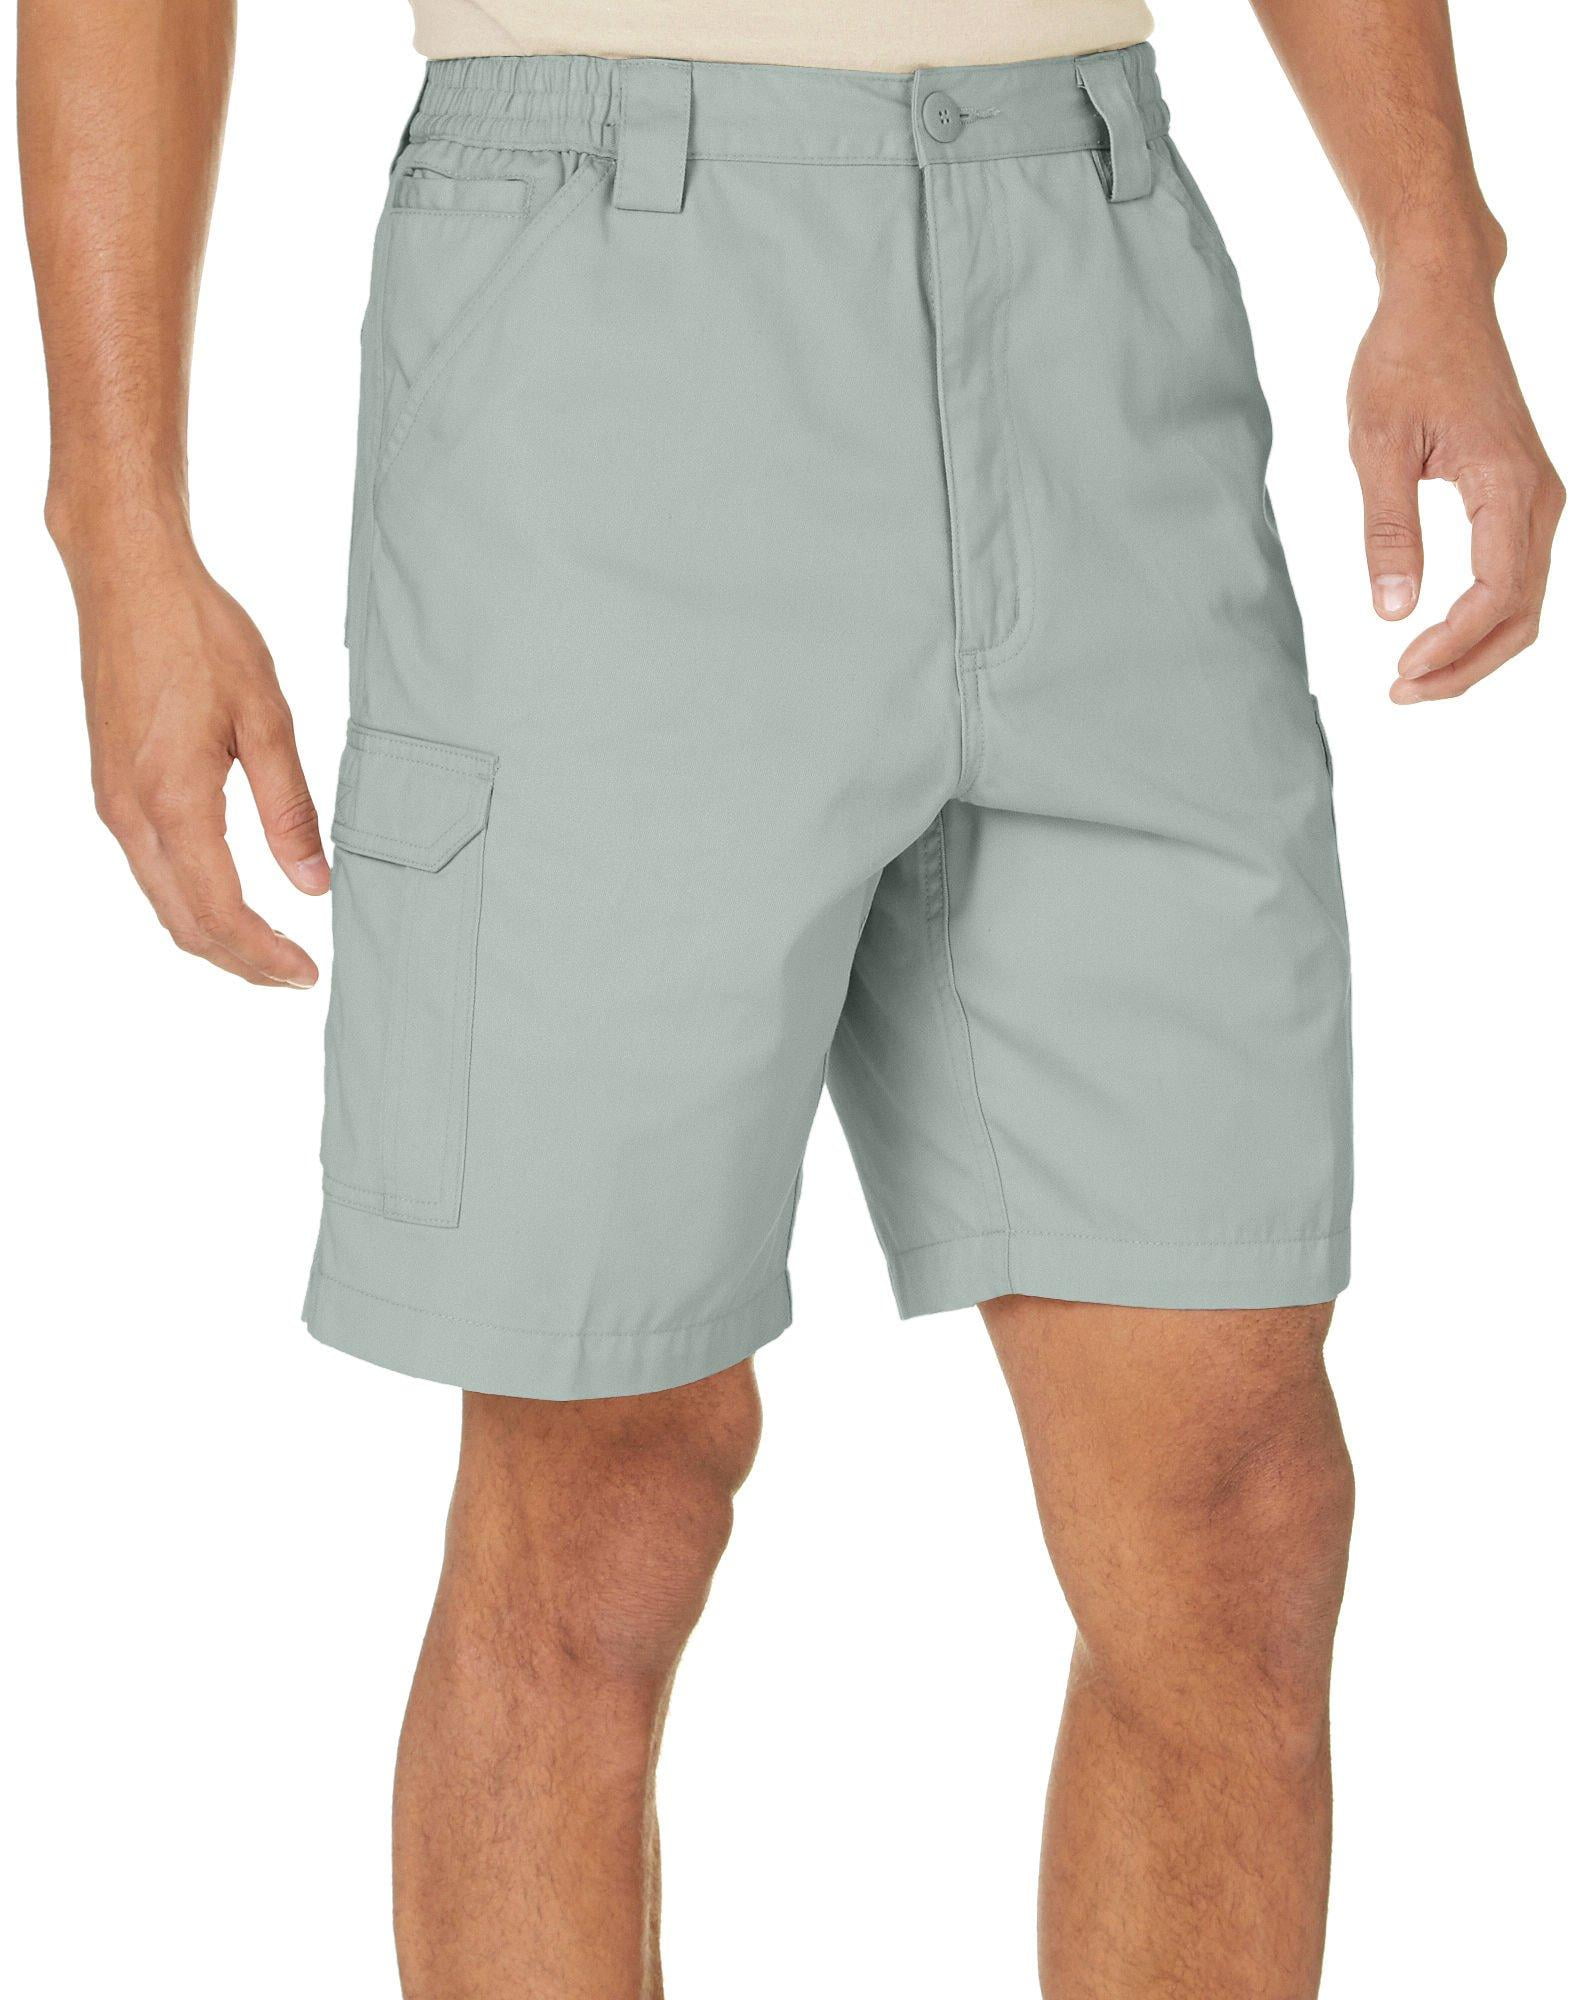 New Mens Chaps Cargo Shorts Performance Zip Fly Drawstring  $19.99 Free Shipping 